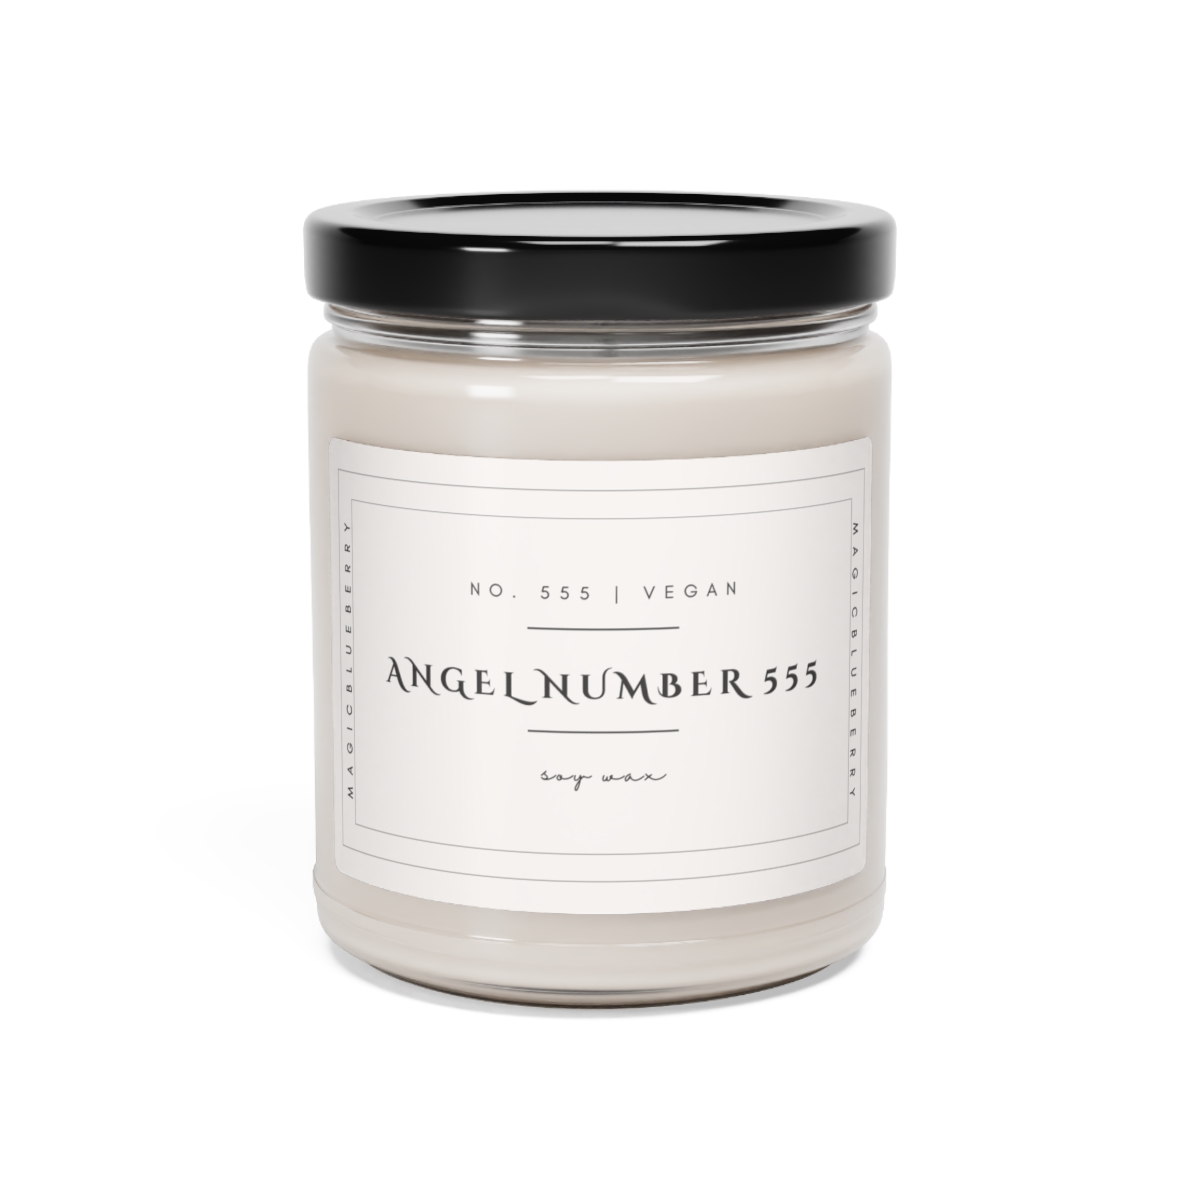 Angel number555 Scented Vegan Soy Wax Candle Clear Jar Candle, Spell Candle, Sassy Candle Vegan Candle Cotton Wick Candle Home Decor Candle product thumbnail image